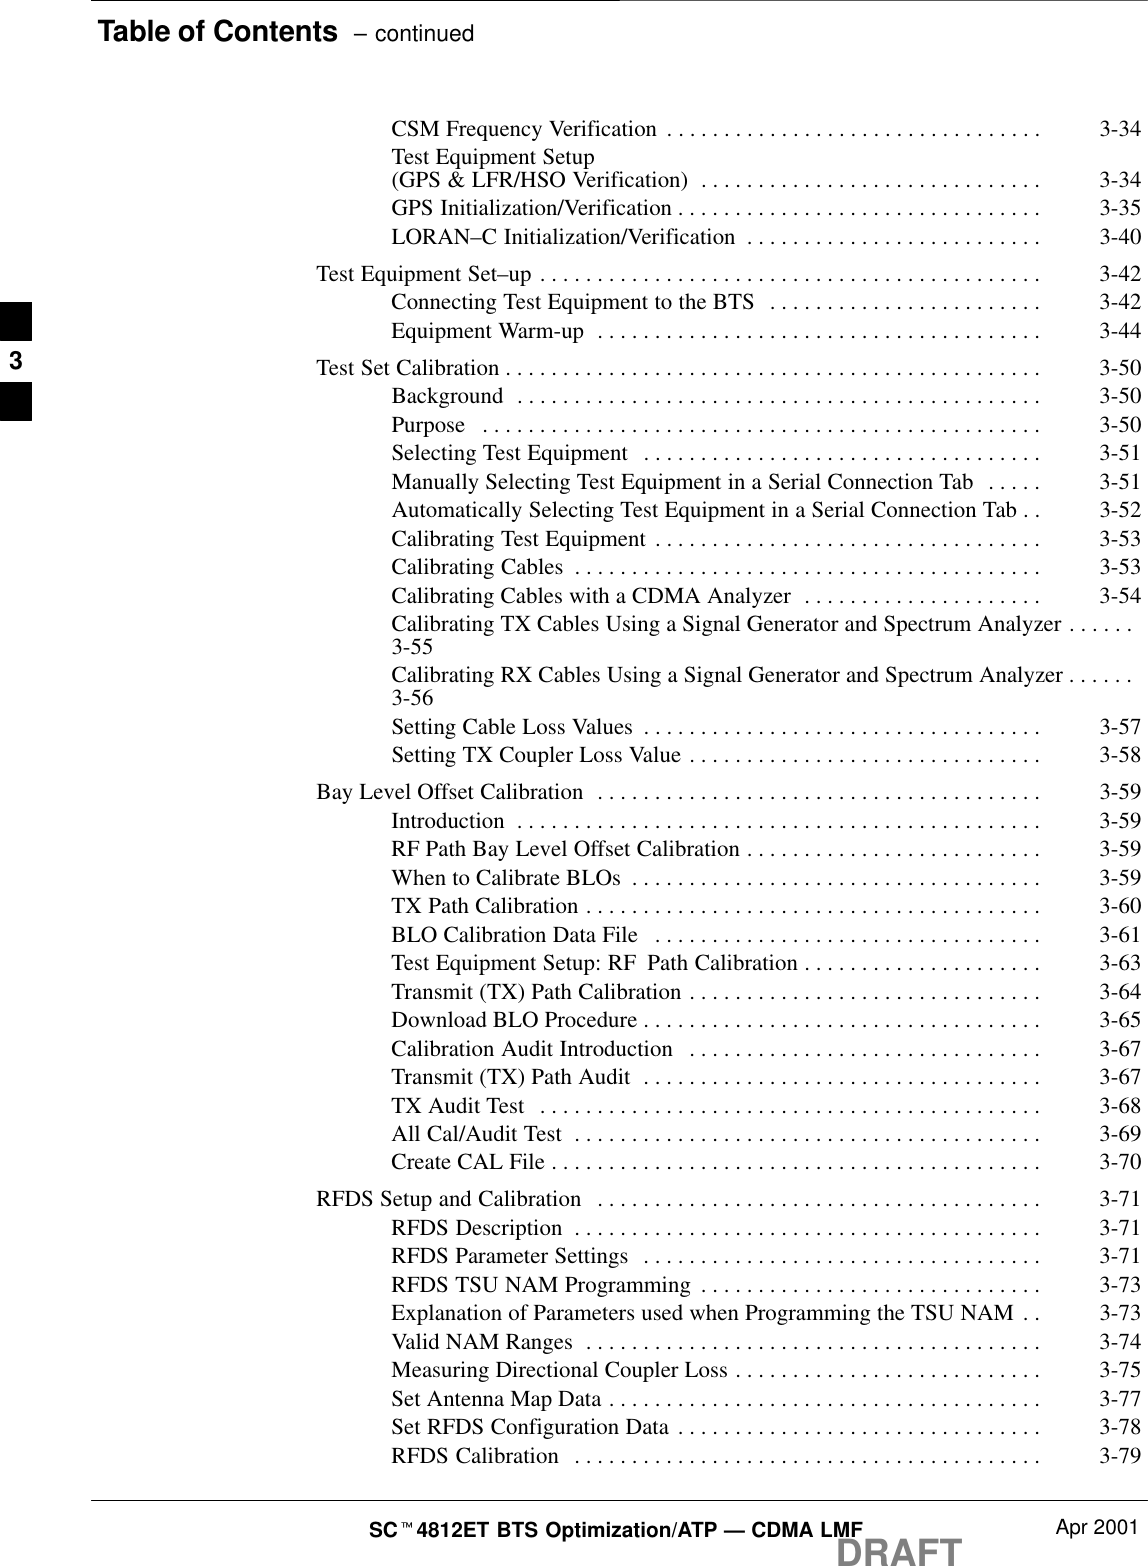 Table of Contents  – continuedDRAFTSCt4812ET BTS Optimization/ATP — CDMA LMF Apr 2001CSM Frequency Verification 3-34. . . . . . . . . . . . . . . . . . . . . . . . . . . . . . . . . Test Equipment Setup (GPS &amp; LFR/HSO Verification) 3-34. . . . . . . . . . . . . . . . . . . . . . . . . . . . . . GPS Initialization/Verification 3-35. . . . . . . . . . . . . . . . . . . . . . . . . . . . . . . . LORAN–C Initialization/Verification 3-40. . . . . . . . . . . . . . . . . . . . . . . . . . Test Equipment Set–up 3-42. . . . . . . . . . . . . . . . . . . . . . . . . . . . . . . . . . . . . . . . . . . . Connecting Test Equipment to the BTS 3-42. . . . . . . . . . . . . . . . . . . . . . . . Equipment Warm-up 3-44. . . . . . . . . . . . . . . . . . . . . . . . . . . . . . . . . . . . . . . Test Set Calibration 3-50. . . . . . . . . . . . . . . . . . . . . . . . . . . . . . . . . . . . . . . . . . . . . . . Background 3-50. . . . . . . . . . . . . . . . . . . . . . . . . . . . . . . . . . . . . . . . . . . . . . Purpose 3-50. . . . . . . . . . . . . . . . . . . . . . . . . . . . . . . . . . . . . . . . . . . . . . . . . Selecting Test Equipment 3-51. . . . . . . . . . . . . . . . . . . . . . . . . . . . . . . . . . . Manually Selecting Test Equipment in a Serial Connection Tab 3-51. . . . . Automatically Selecting Test Equipment in a Serial Connection Tab 3-52. . Calibrating Test Equipment 3-53. . . . . . . . . . . . . . . . . . . . . . . . . . . . . . . . . . Calibrating Cables 3-53. . . . . . . . . . . . . . . . . . . . . . . . . . . . . . . . . . . . . . . . . Calibrating Cables with a CDMA Analyzer 3-54. . . . . . . . . . . . . . . . . . . . . Calibrating TX Cables Using a Signal Generator and Spectrum Analyzer . . . . . . 3-55Calibrating RX Cables Using a Signal Generator and Spectrum Analyzer . . . . . . 3-56Setting Cable Loss Values 3-57. . . . . . . . . . . . . . . . . . . . . . . . . . . . . . . . . . . Setting TX Coupler Loss Value 3-58. . . . . . . . . . . . . . . . . . . . . . . . . . . . . . . Bay Level Offset Calibration 3-59. . . . . . . . . . . . . . . . . . . . . . . . . . . . . . . . . . . . . . . Introduction 3-59. . . . . . . . . . . . . . . . . . . . . . . . . . . . . . . . . . . . . . . . . . . . . . RF Path Bay Level Offset Calibration 3-59. . . . . . . . . . . . . . . . . . . . . . . . . . When to Calibrate BLOs 3-59. . . . . . . . . . . . . . . . . . . . . . . . . . . . . . . . . . . . TX Path Calibration 3-60. . . . . . . . . . . . . . . . . . . . . . . . . . . . . . . . . . . . . . . . BLO Calibration Data File 3-61. . . . . . . . . . . . . . . . . . . . . . . . . . . . . . . . . . Test Equipment Setup: RF Path Calibration 3-63. . . . . . . . . . . . . . . . . . . . . Transmit (TX) Path Calibration 3-64. . . . . . . . . . . . . . . . . . . . . . . . . . . . . . . Download BLO Procedure 3-65. . . . . . . . . . . . . . . . . . . . . . . . . . . . . . . . . . . Calibration Audit Introduction 3-67. . . . . . . . . . . . . . . . . . . . . . . . . . . . . . . Transmit (TX) Path Audit 3-67. . . . . . . . . . . . . . . . . . . . . . . . . . . . . . . . . . . TX Audit Test 3-68. . . . . . . . . . . . . . . . . . . . . . . . . . . . . . . . . . . . . . . . . . . . All Cal/Audit Test 3-69. . . . . . . . . . . . . . . . . . . . . . . . . . . . . . . . . . . . . . . . . Create CAL File 3-70. . . . . . . . . . . . . . . . . . . . . . . . . . . . . . . . . . . . . . . . . . . RFDS Setup and Calibration 3-71. . . . . . . . . . . . . . . . . . . . . . . . . . . . . . . . . . . . . . . RFDS Description 3-71. . . . . . . . . . . . . . . . . . . . . . . . . . . . . . . . . . . . . . . . . RFDS Parameter Settings 3-71. . . . . . . . . . . . . . . . . . . . . . . . . . . . . . . . . . . RFDS TSU NAM Programming 3-73. . . . . . . . . . . . . . . . . . . . . . . . . . . . . . Explanation of Parameters used when Programming the TSU NAM 3-73. . Valid NAM Ranges 3-74. . . . . . . . . . . . . . . . . . . . . . . . . . . . . . . . . . . . . . . . Measuring Directional Coupler Loss 3-75. . . . . . . . . . . . . . . . . . . . . . . . . . . Set Antenna Map Data 3-77. . . . . . . . . . . . . . . . . . . . . . . . . . . . . . . . . . . . . . Set RFDS Configuration Data 3-78. . . . . . . . . . . . . . . . . . . . . . . . . . . . . . . . RFDS Calibration 3-79. . . . . . . . . . . . . . . . . . . . . . . . . . . . . . . . . . . . . . . . . 3